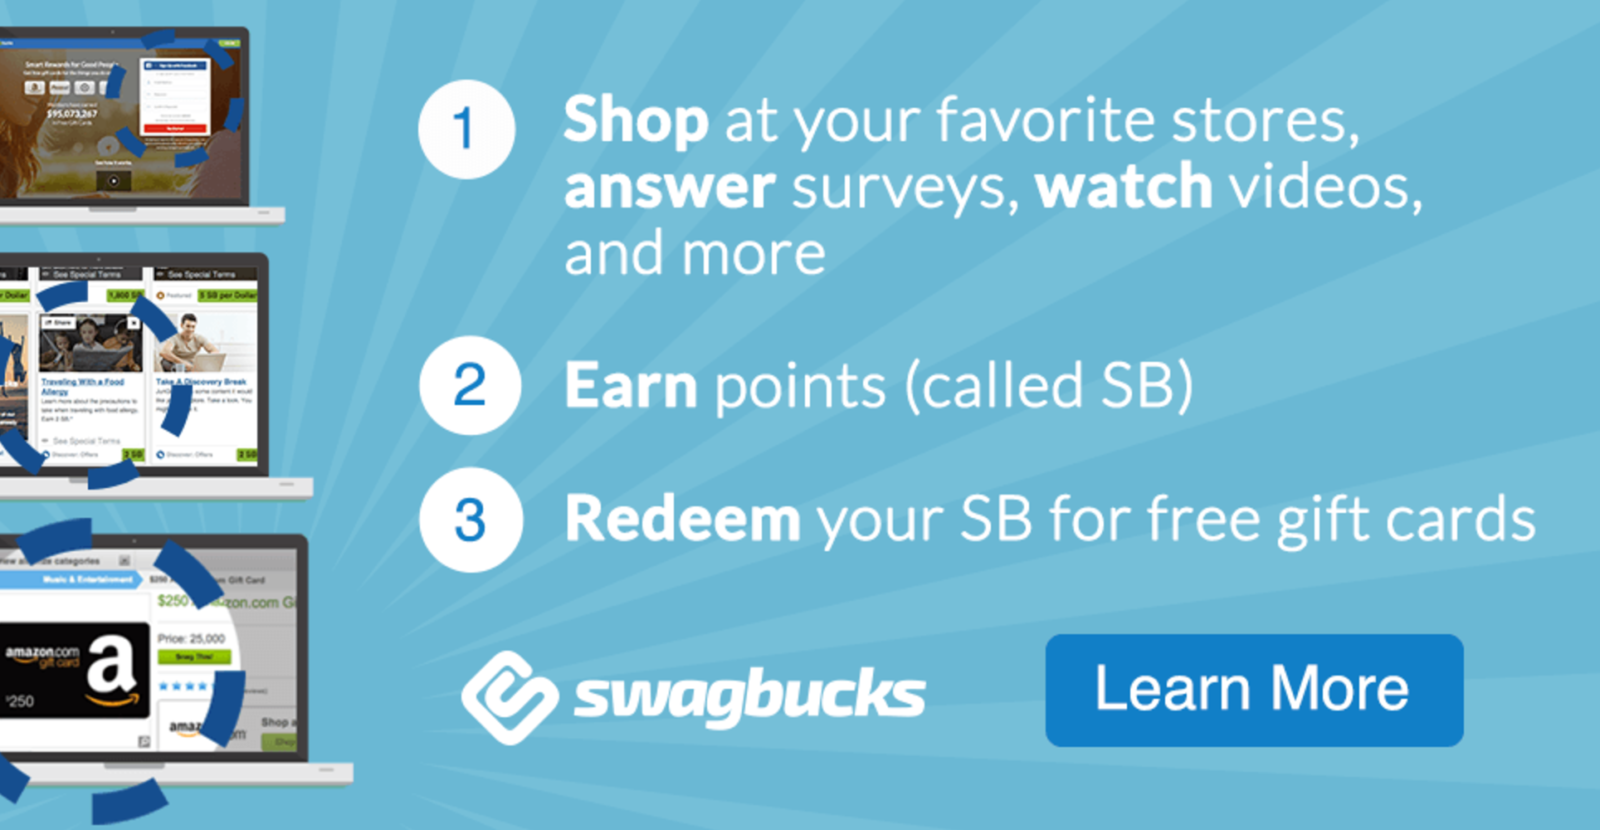 5 Simple Ways to Maximize Your Rewards Using the Swagbucks Search